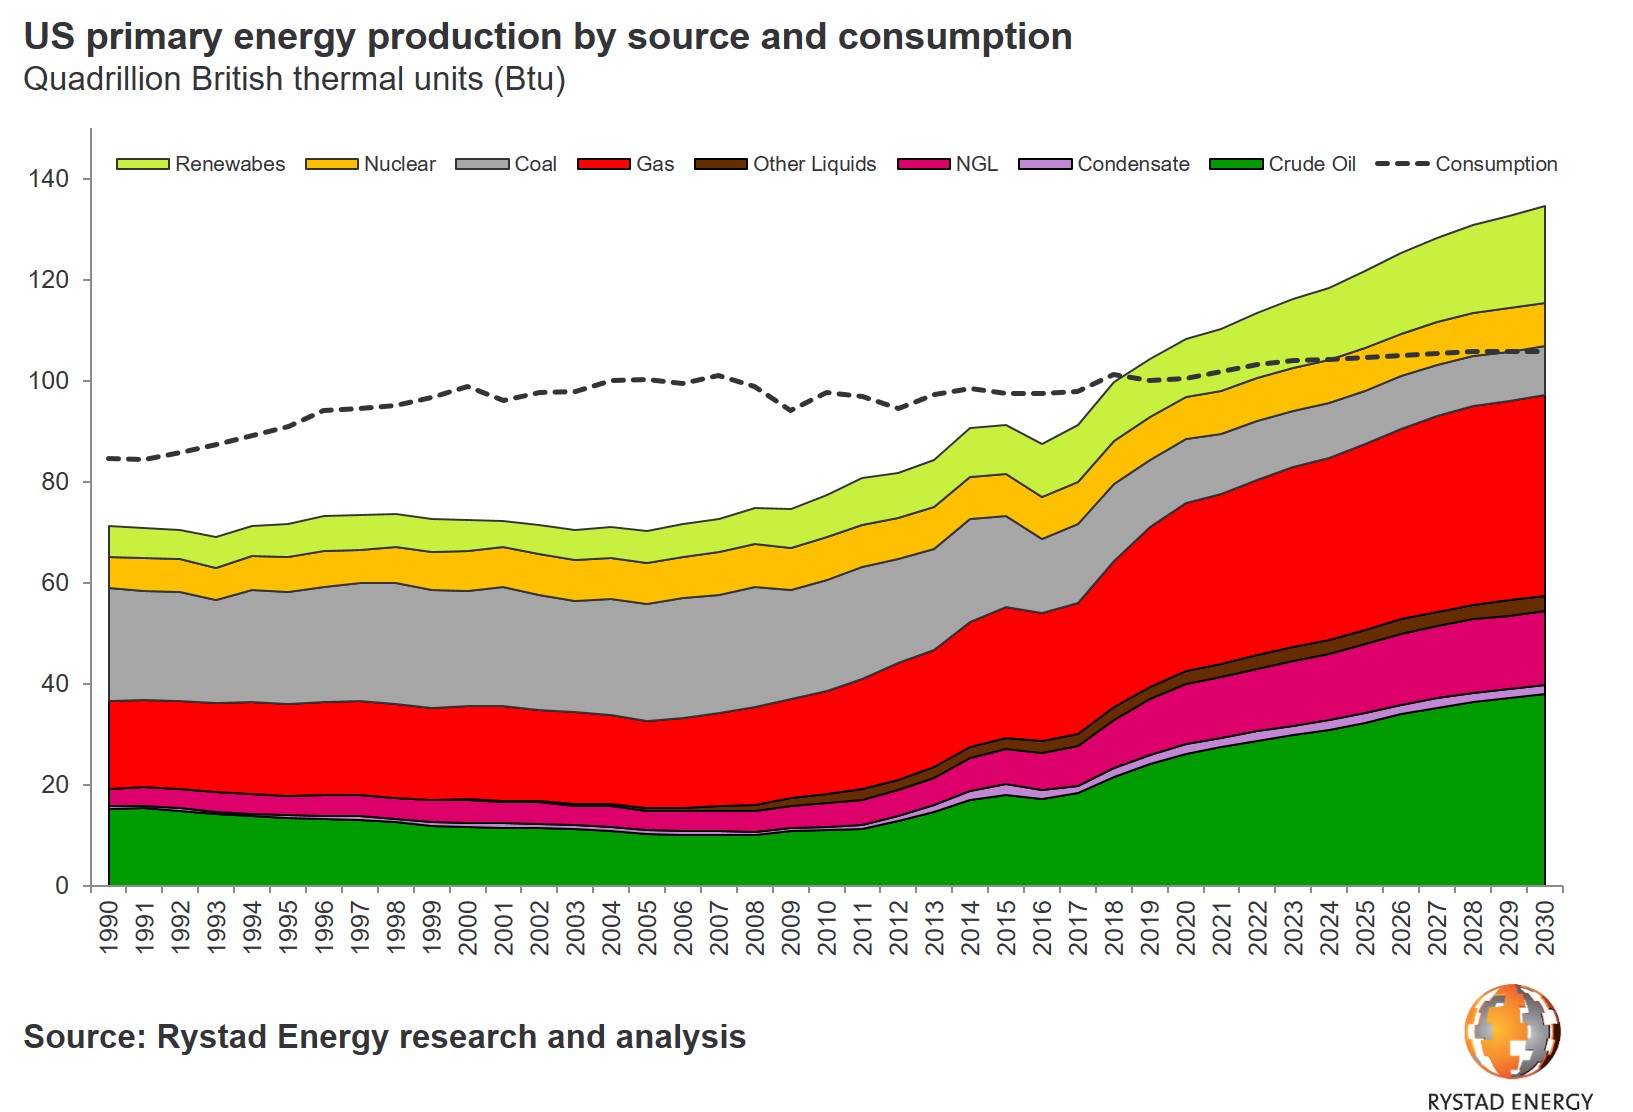 20191125_PR Charts US primary energy production by source and consumption.gif.jpg